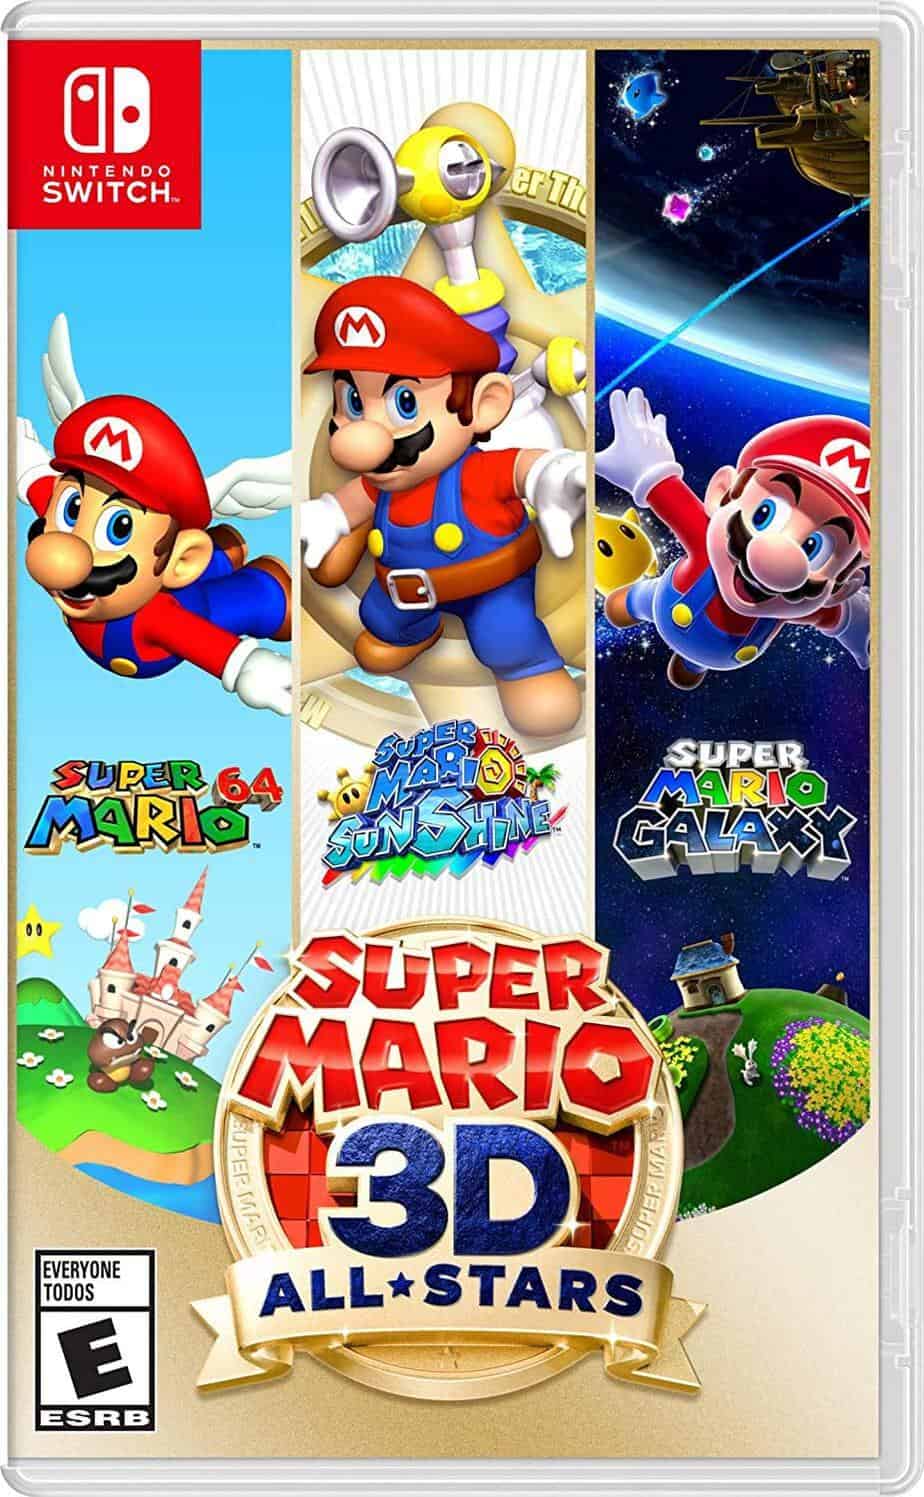 Best Gaming Gifts - Super Mario 3D all stars for Nintendo Switch